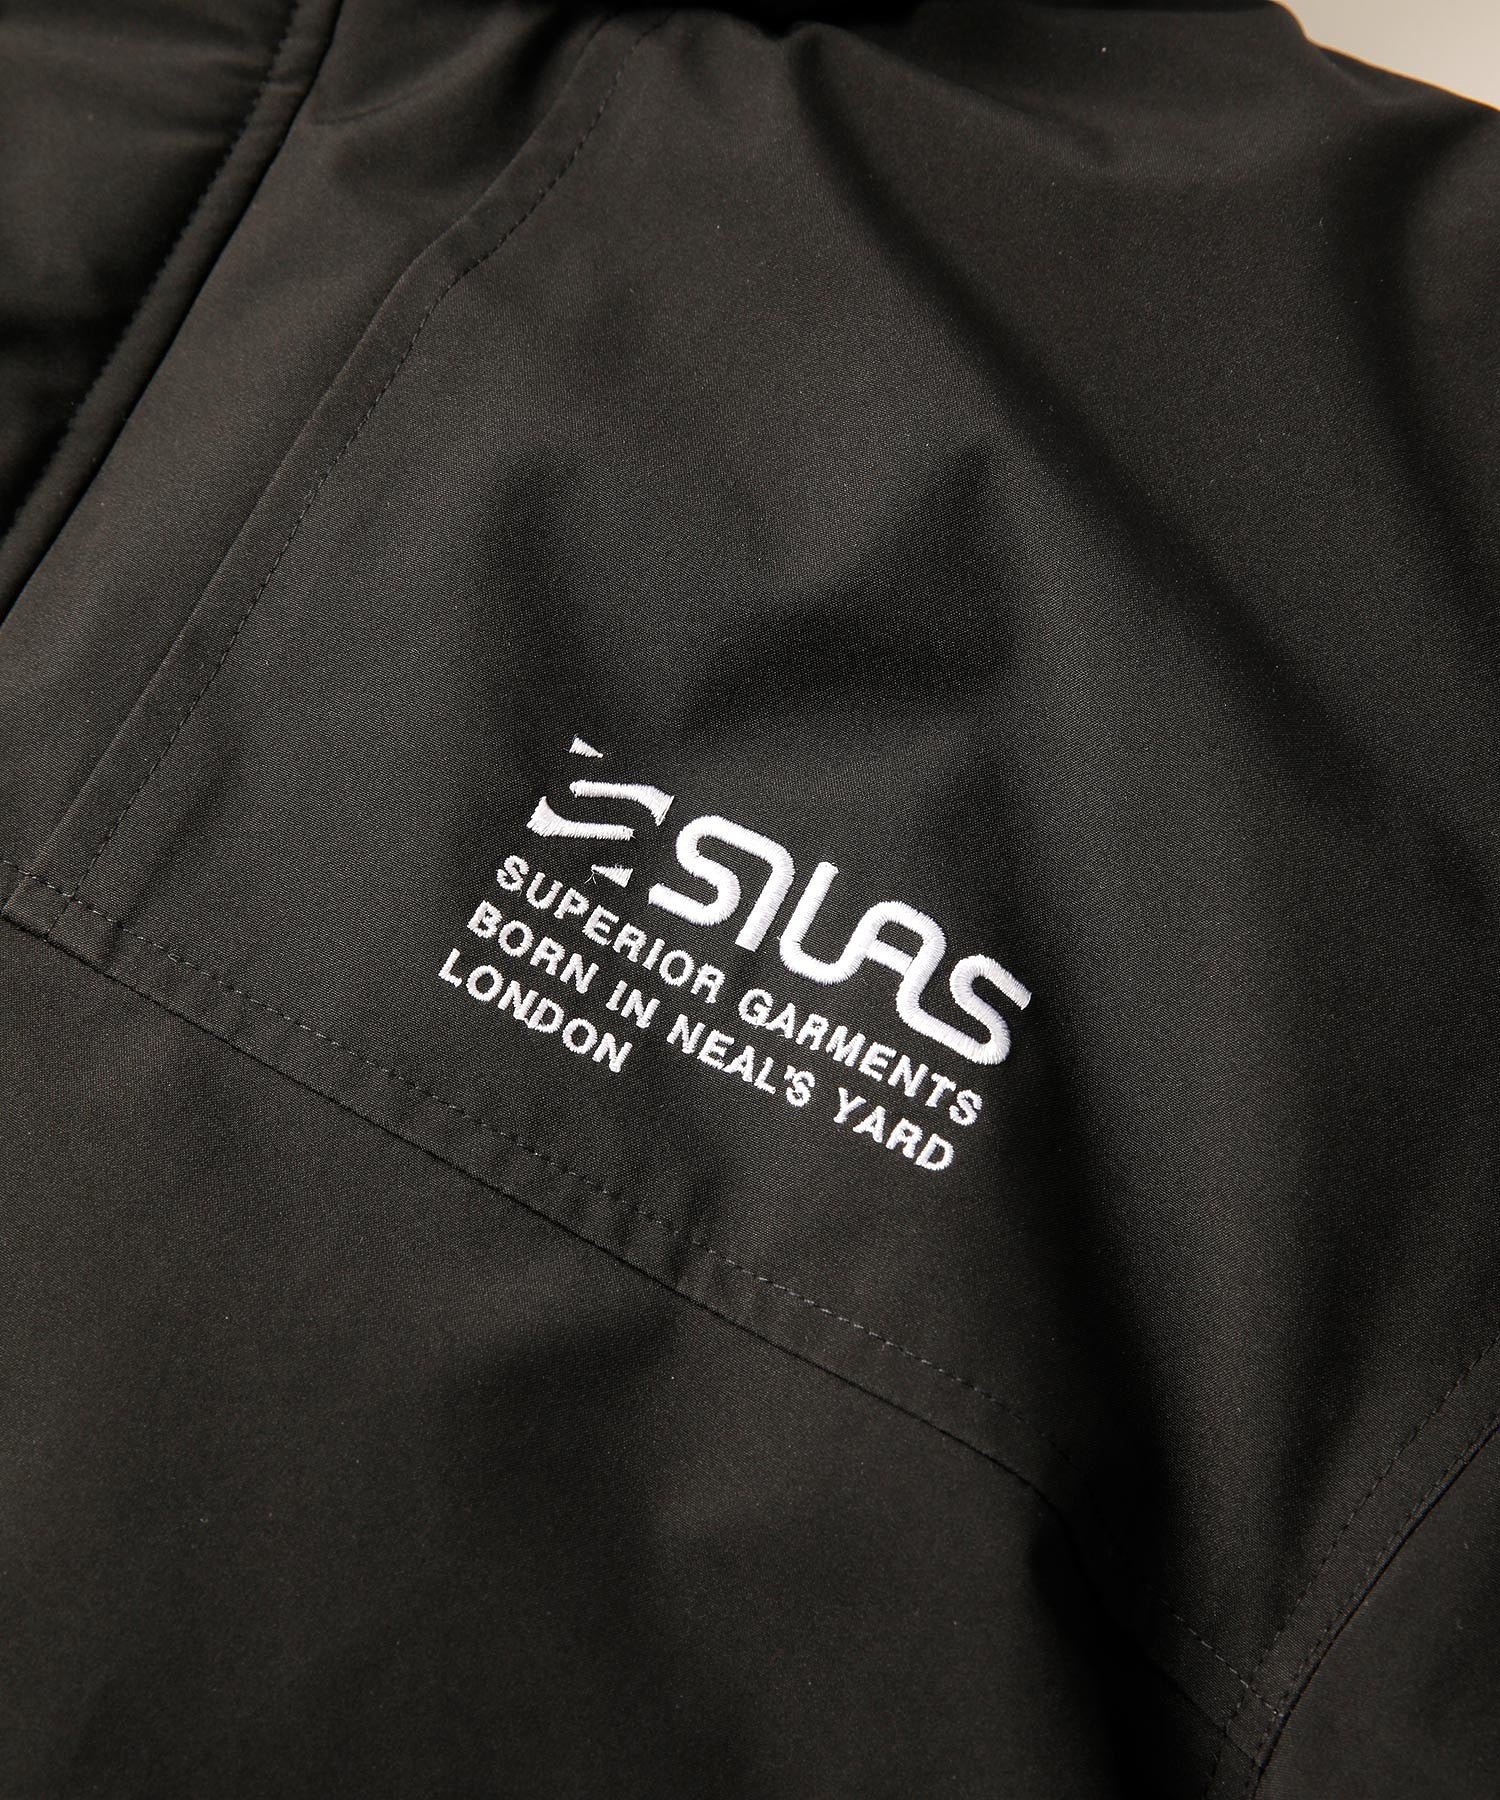 HOODED PUFFER JACKET SILAS